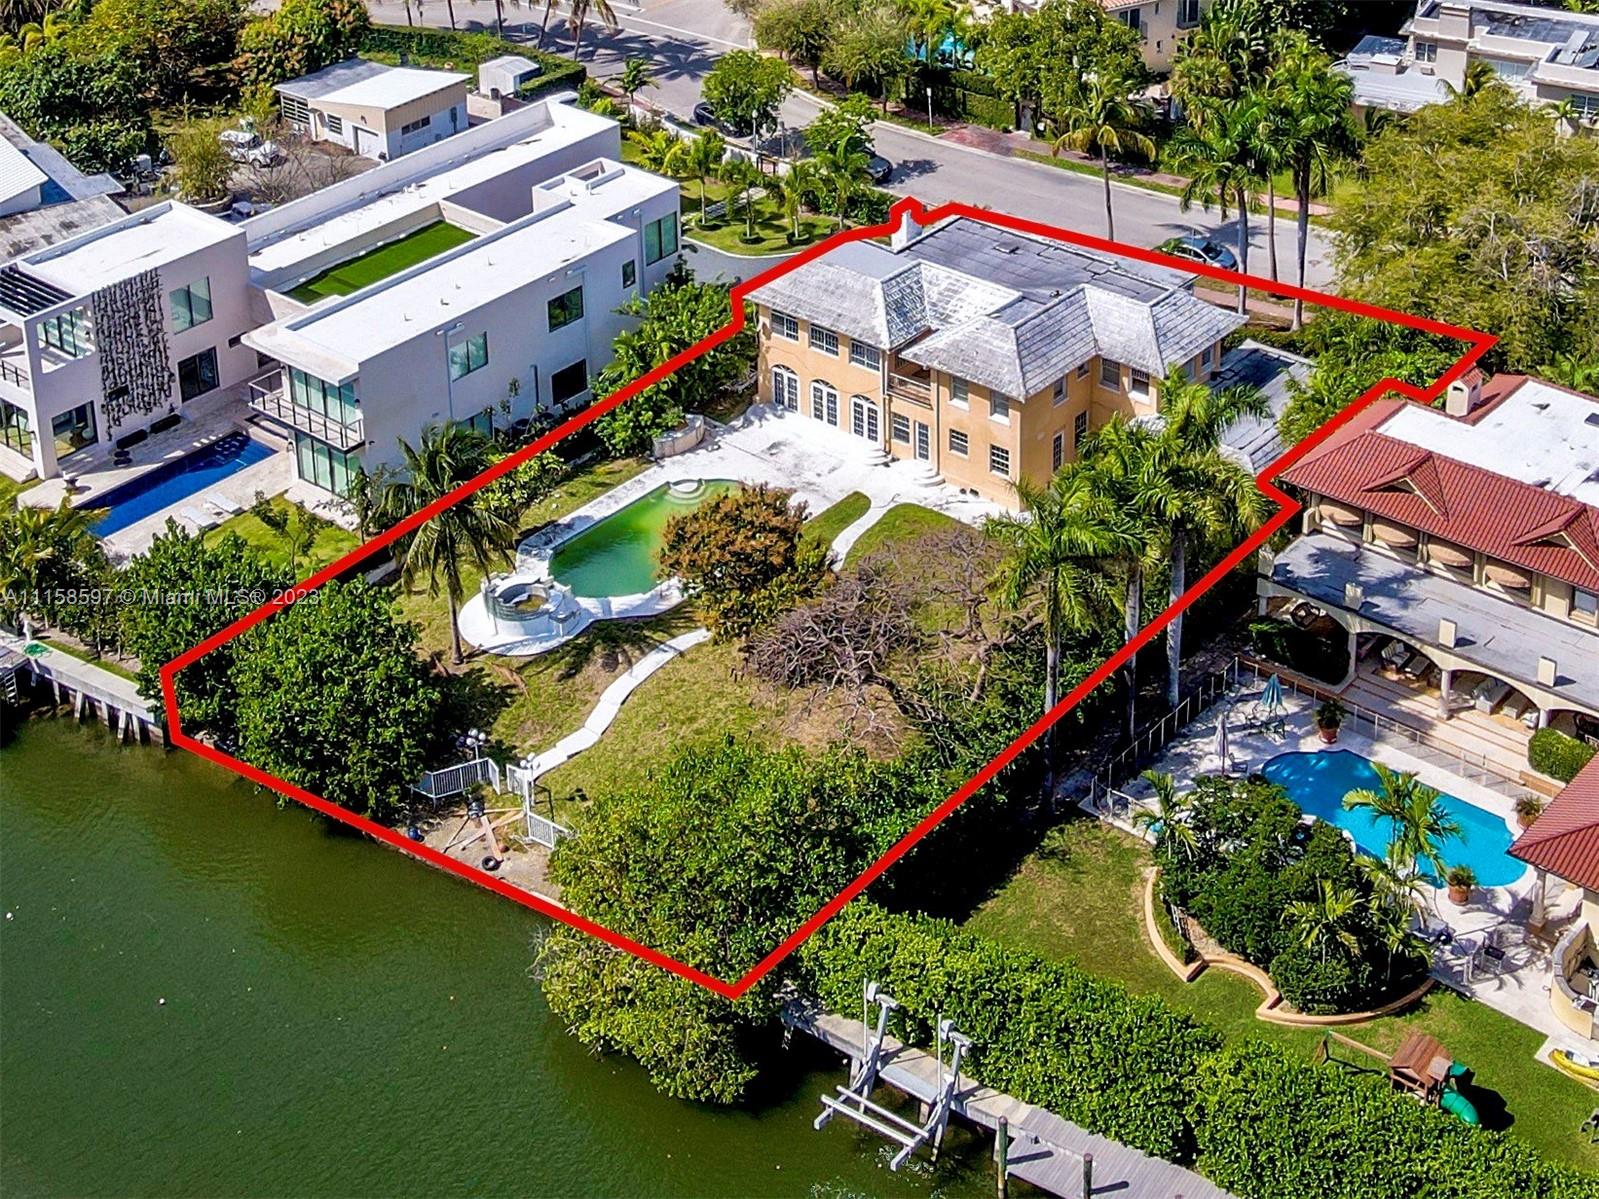 REDUCED!!!! Build up tp 9,500sf waterfront dream mansion or remodel the existing house on this rare to find huge 19,979 square feet lot with 100 ft waterfront on Flamingo Drive, one of the most peaceful and luxurious Miami Beach street.